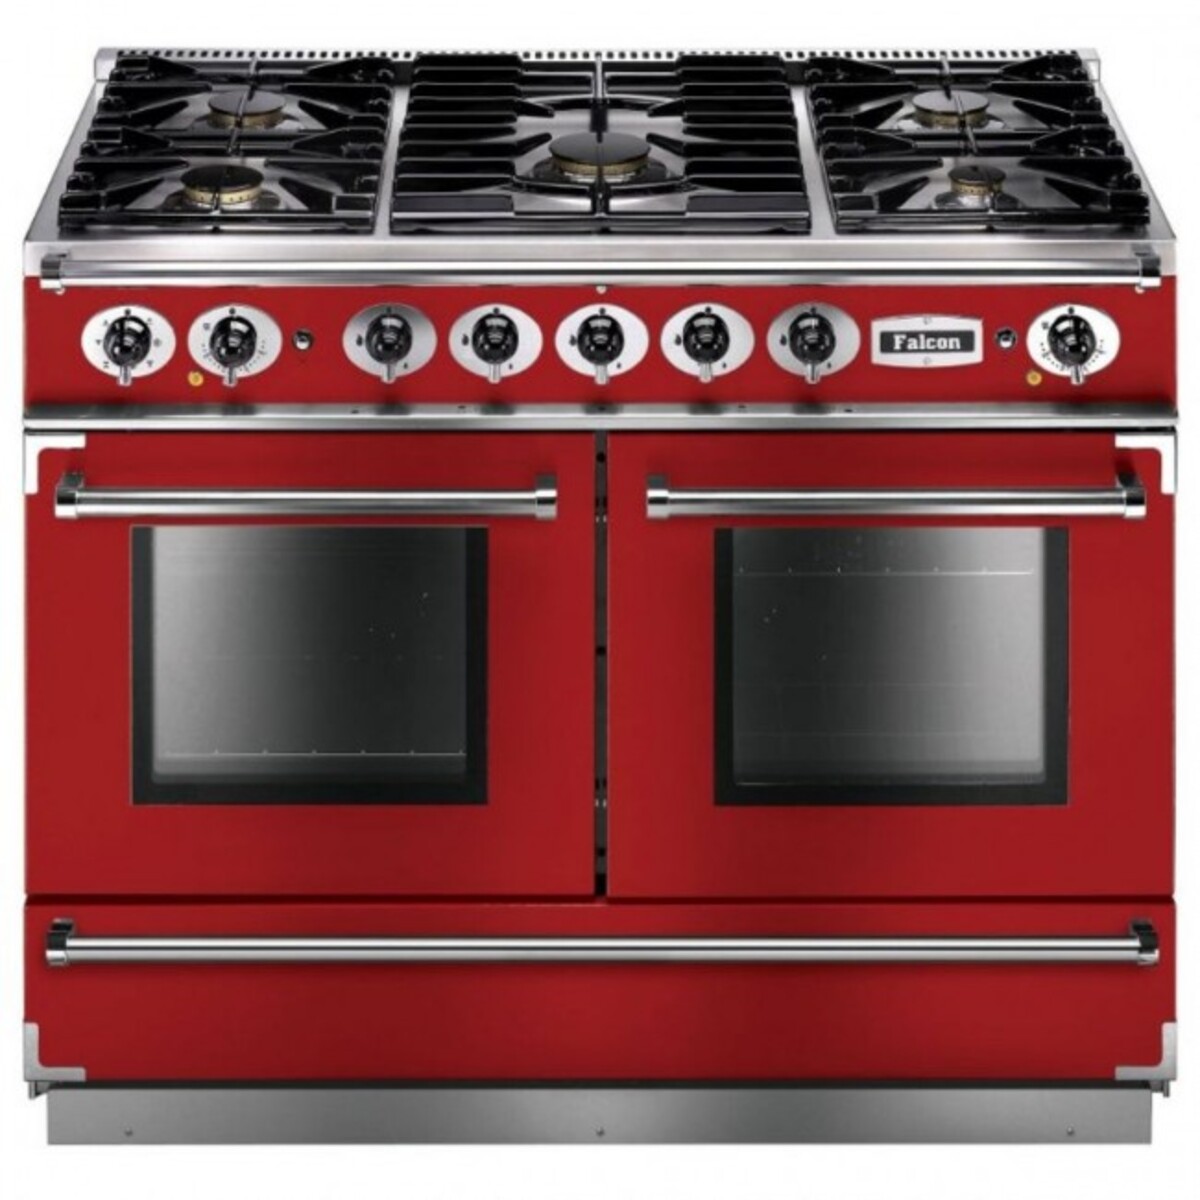 FALCON FCON1092DFRDNM 87160 - 110cm 1092 Dual Fuel Range Cooker, Red